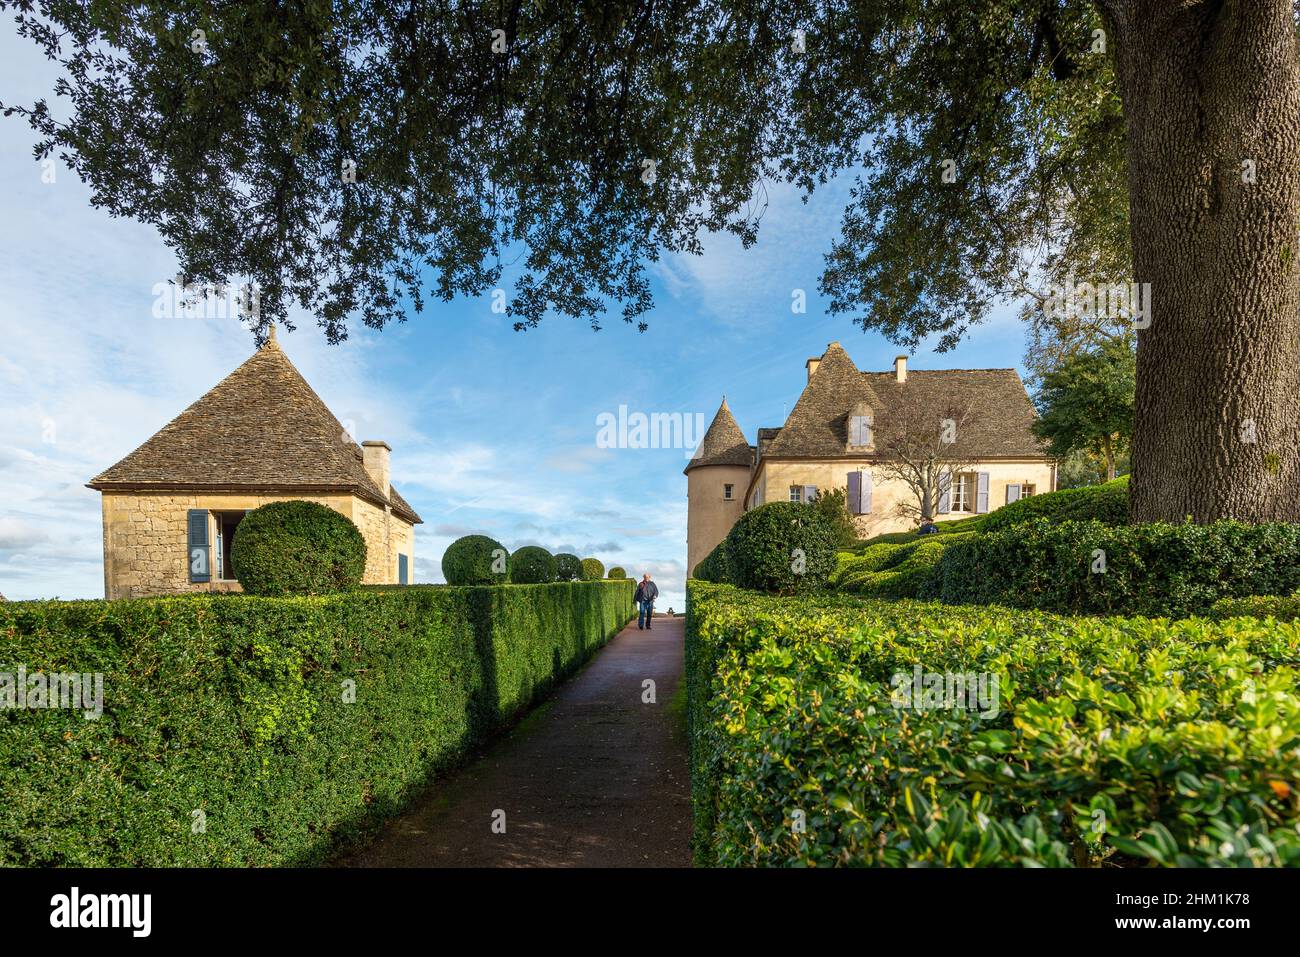 Vezac, France - October 31, 2021: Unrecognizable visitor walking up a path lined with clipped boxwood hedges in the garden of the Marqueyssac Castle i Stock Photo